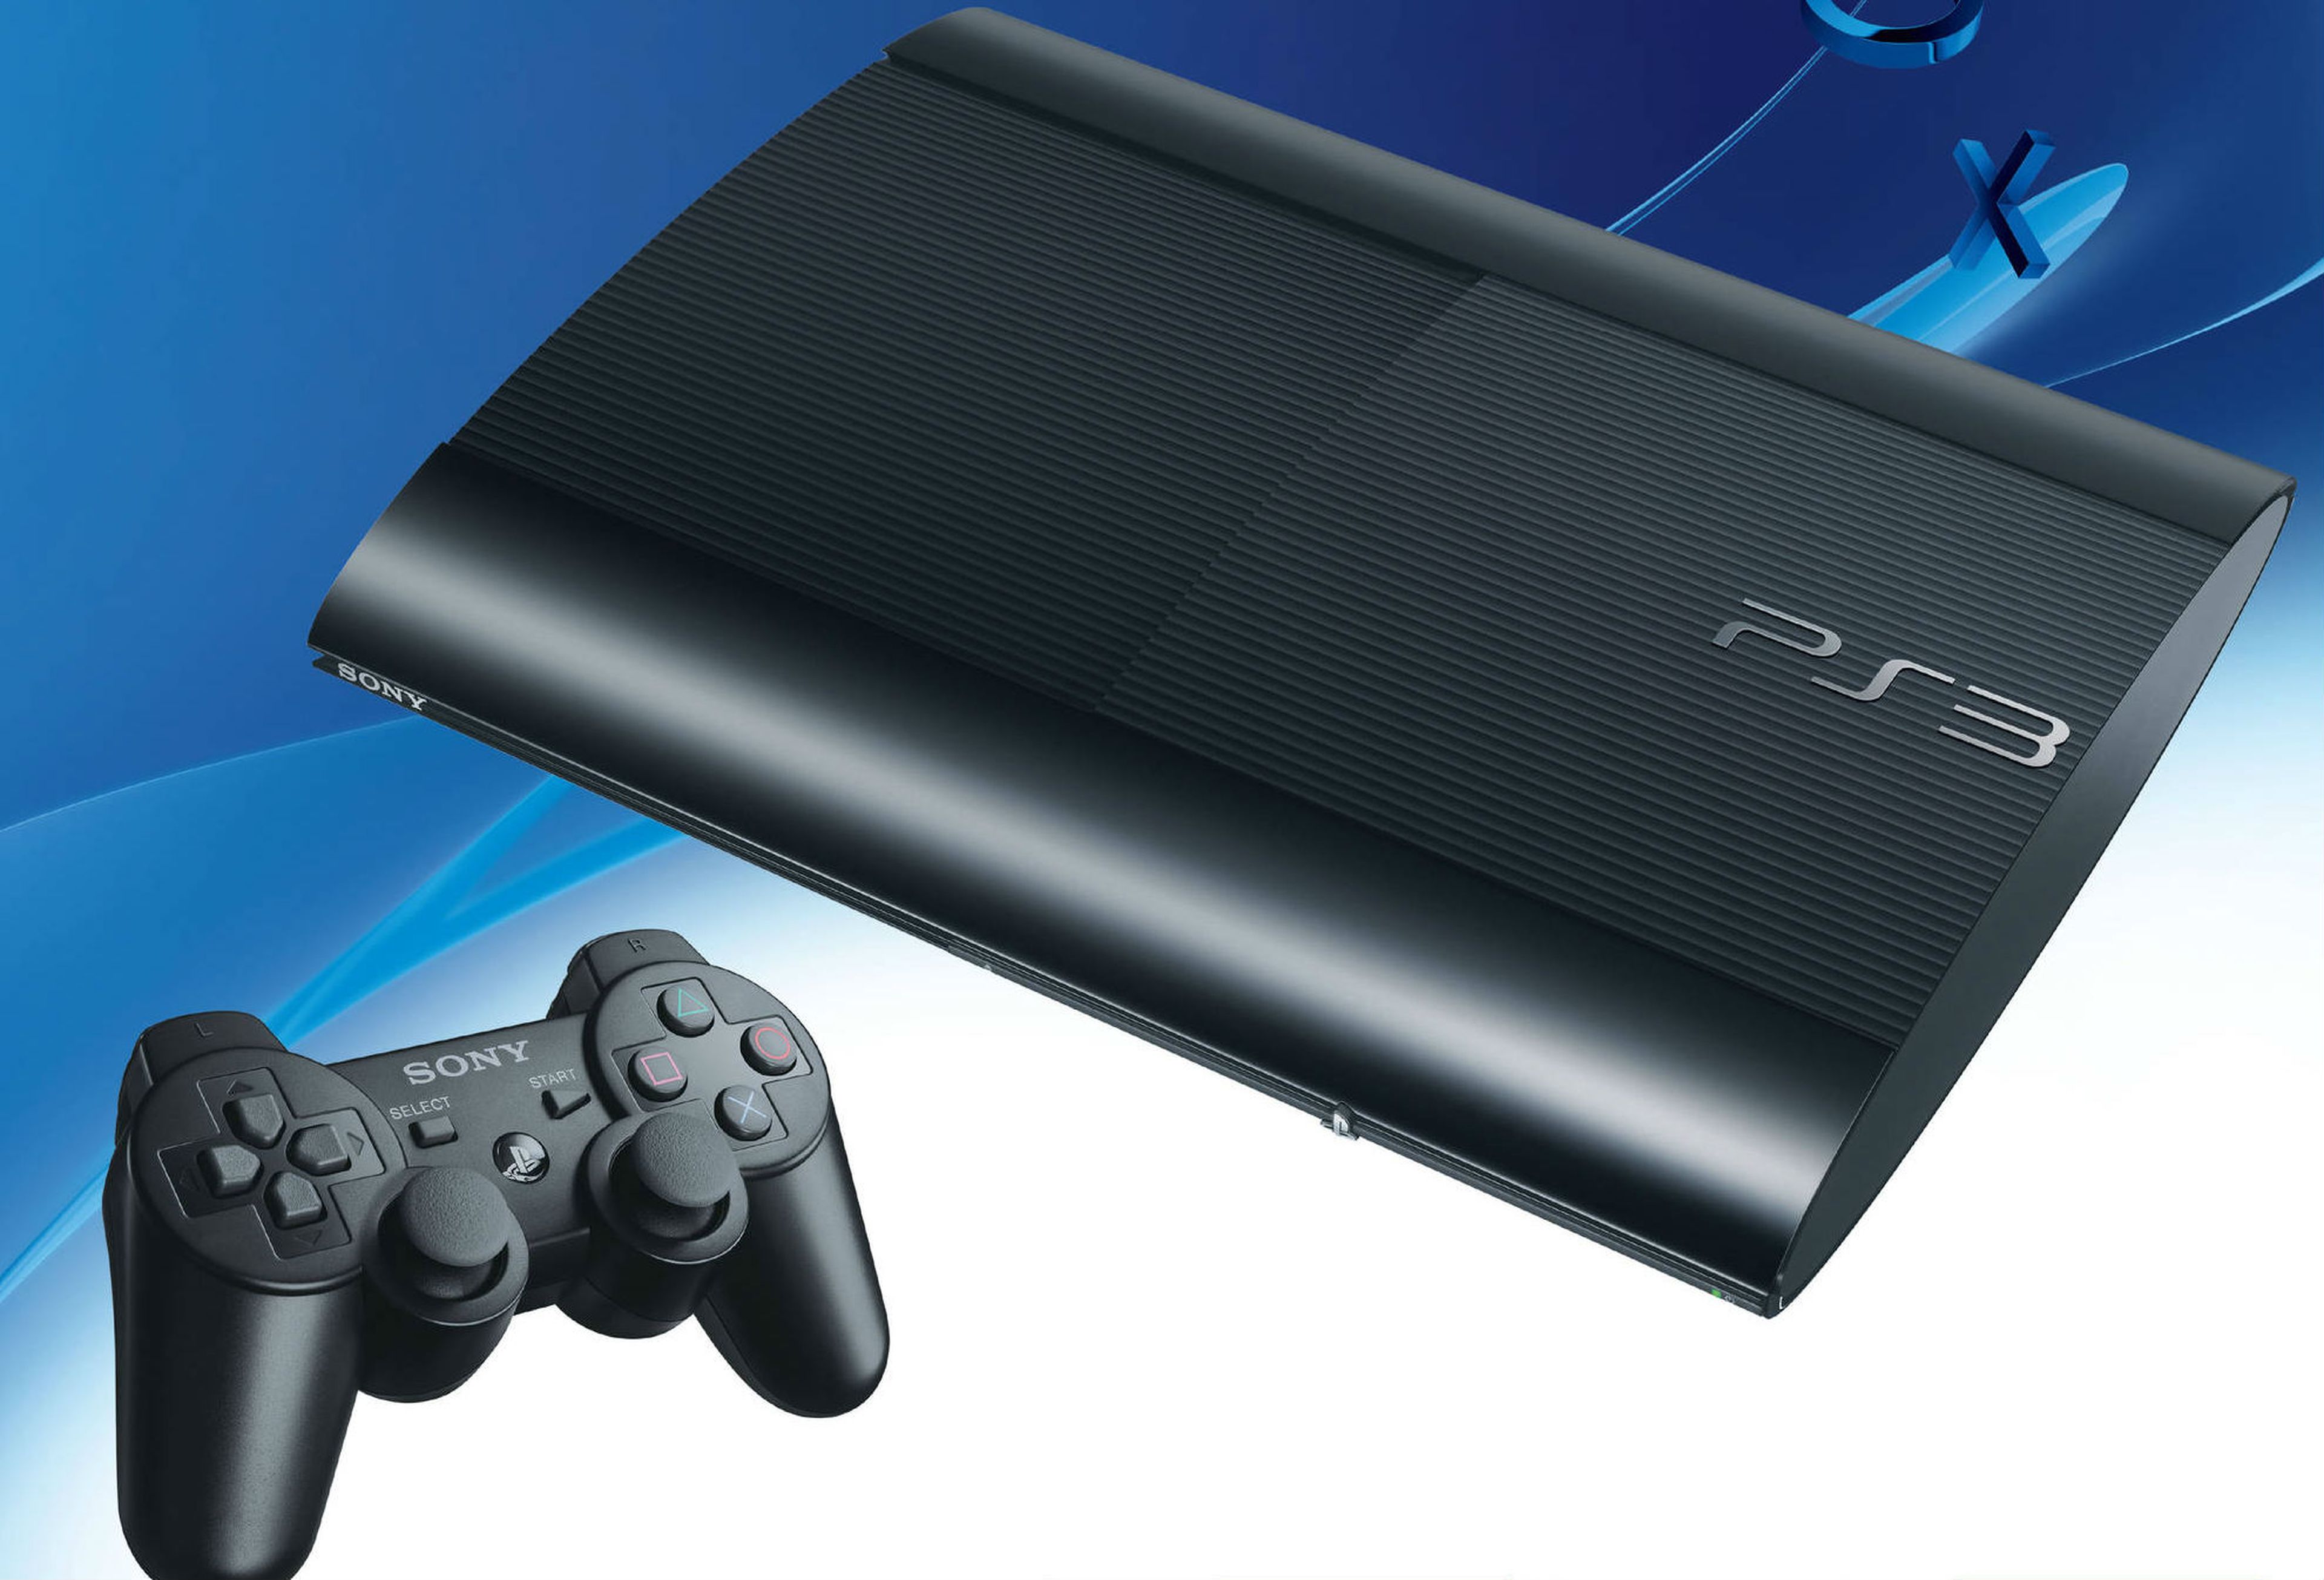 Popping play 3. Sony PLAYSTATION 3 Slim. Ps3 super Slim 500gb. Sony PLAYSTATION 3 super Slim 500gb. Sony PLAYSTATION 3 ps3 super Slim.